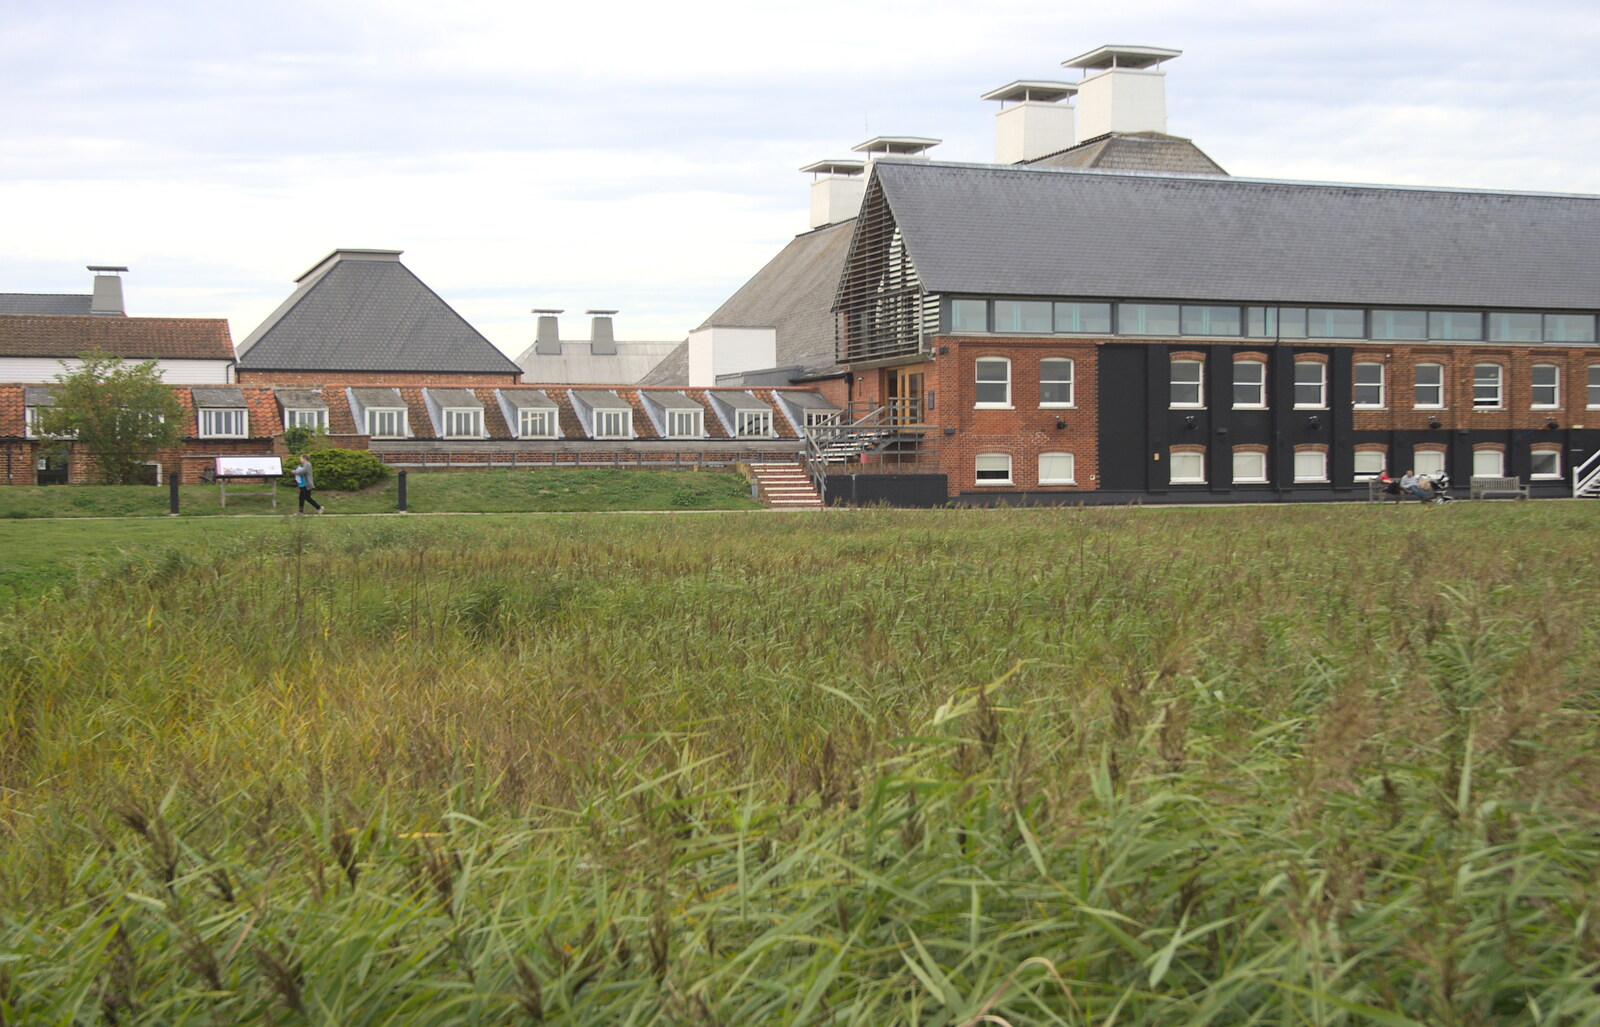 Snape Maltings and a reed bed from The Aldeburgh Food Festival, Aldeburgh, Suffolk - 30th September 2012